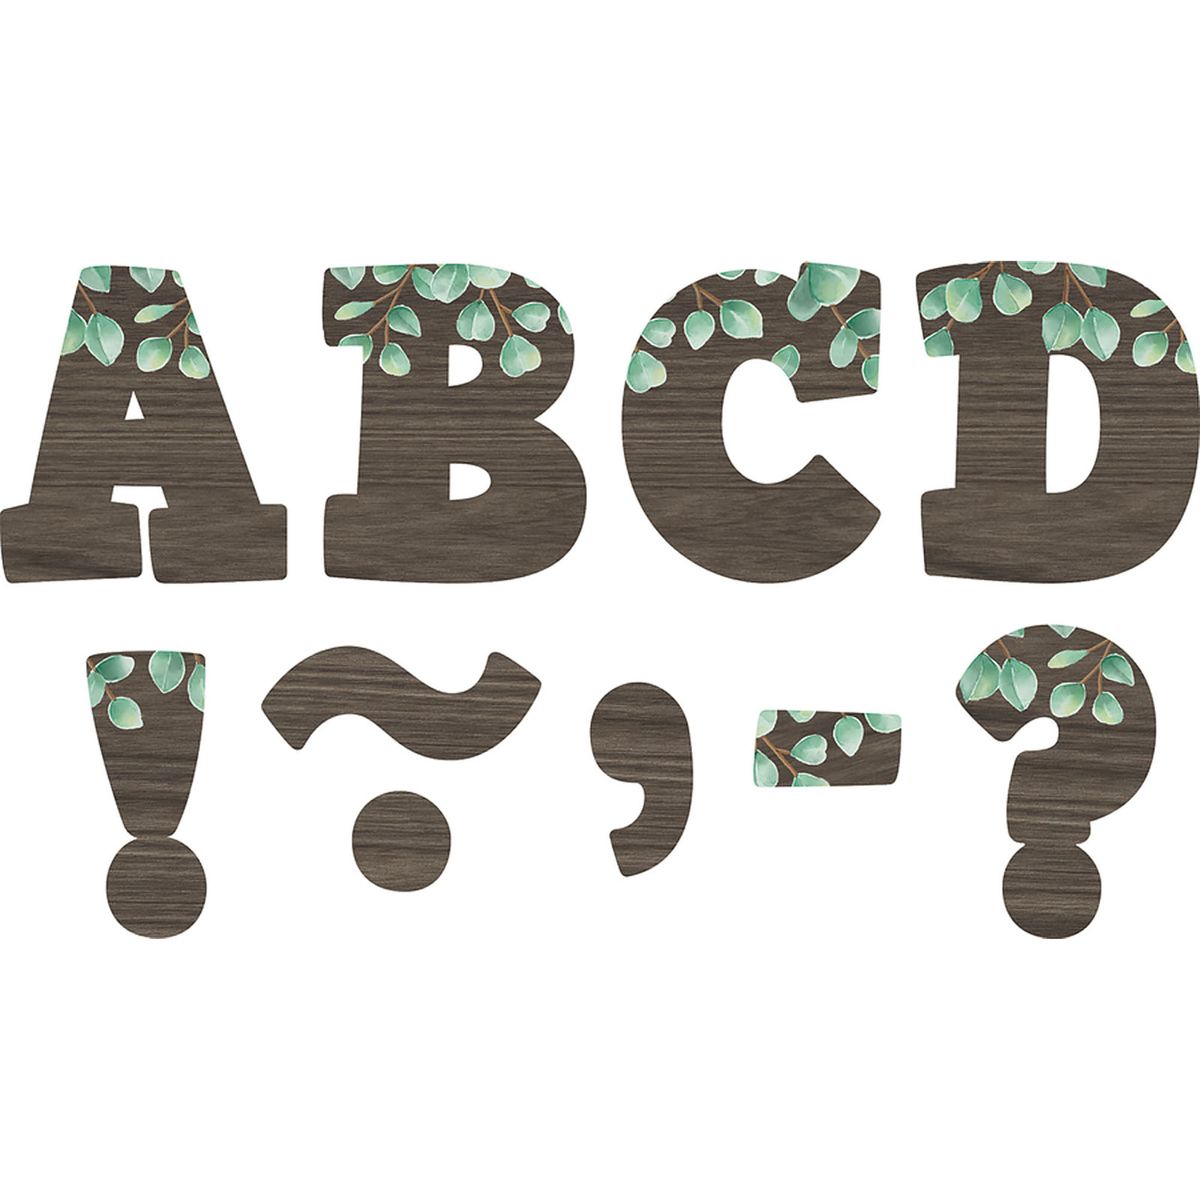 [RDY] [送料無料] Teacher Created Resources Eucalyptus Bold Block 3-Inch Magnetic Letters, 55 pieces. [楽天海外通販] | Teacher Created Resources Eucalyptus Bold Block 3-Inch Magnetic Letters, 55 Pieces